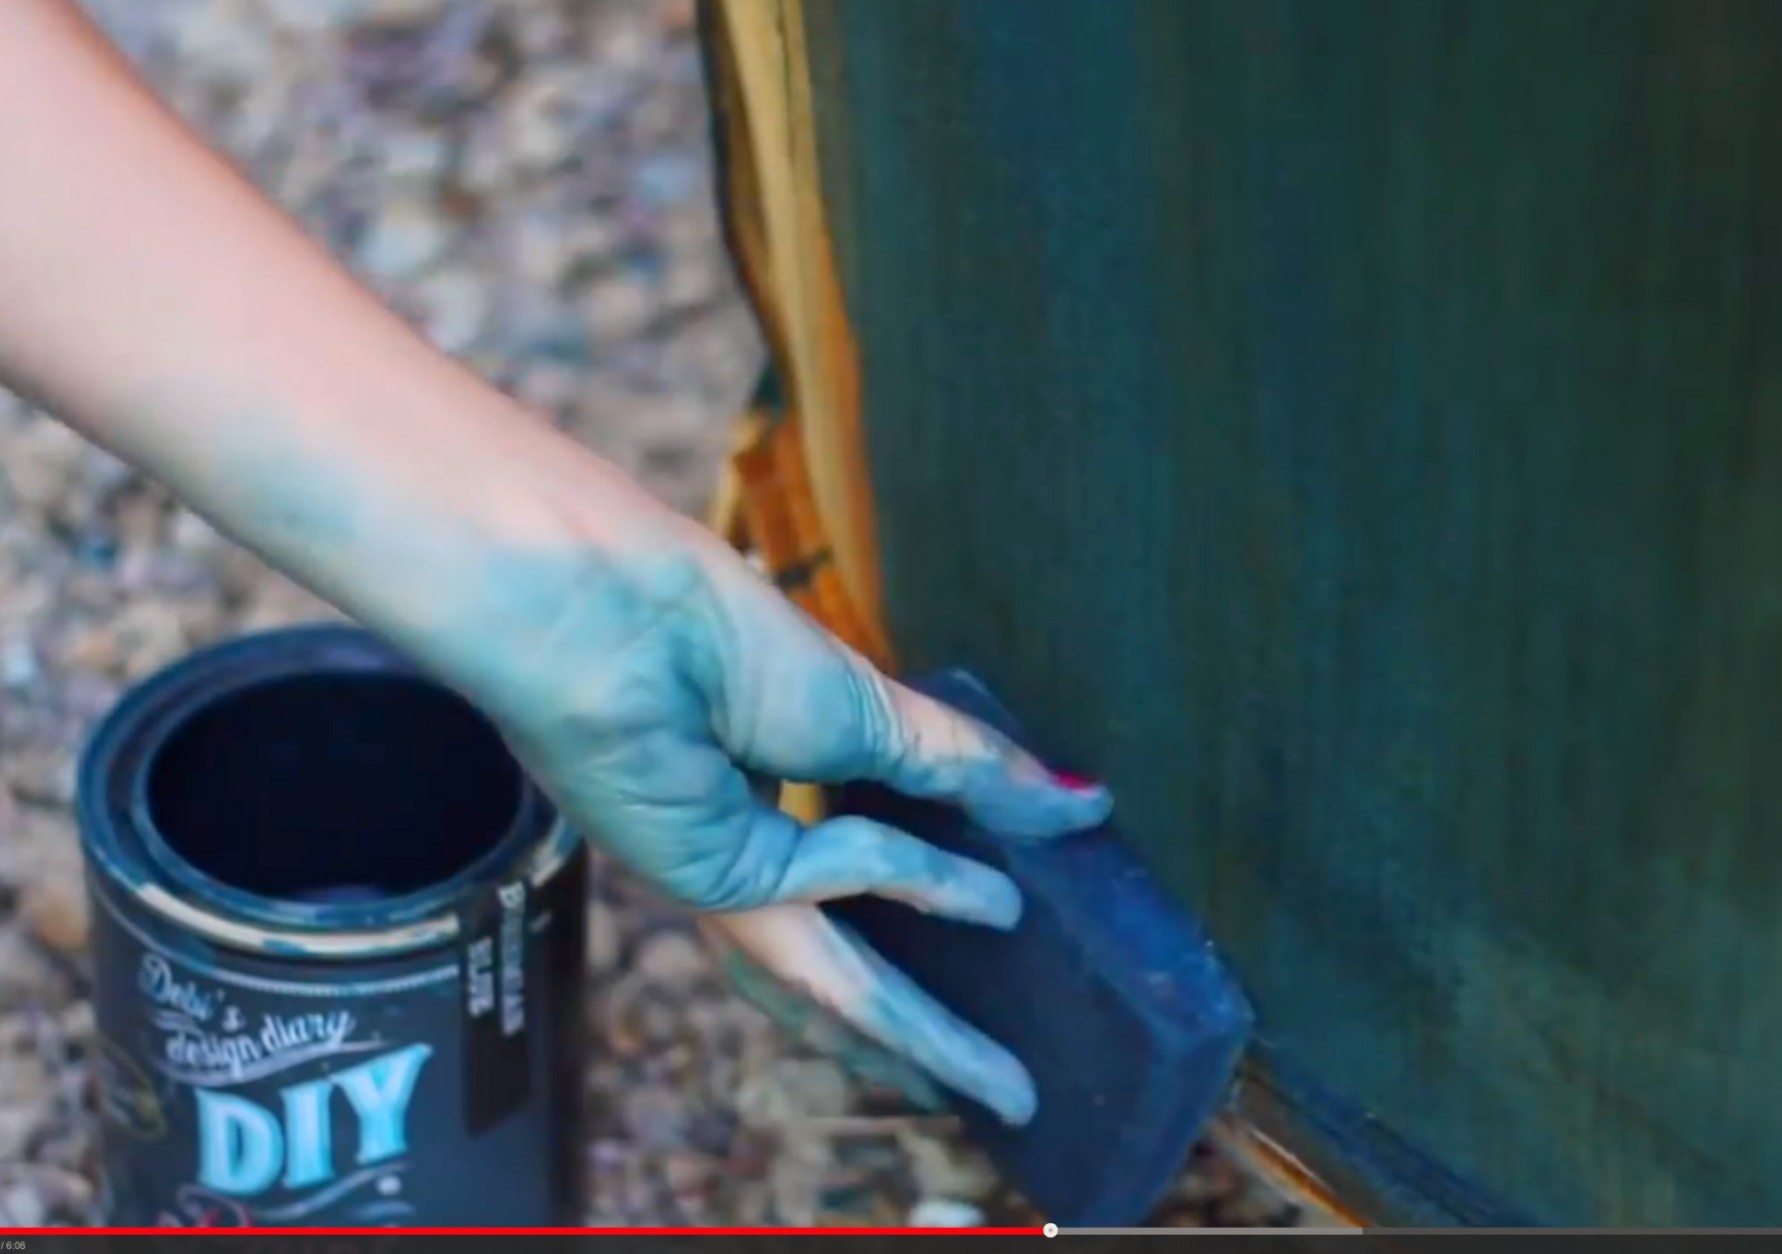 How To Paint A Couch Or Upholstery | Debis Design Diary Can You Paint Chalk Paint On Fabric